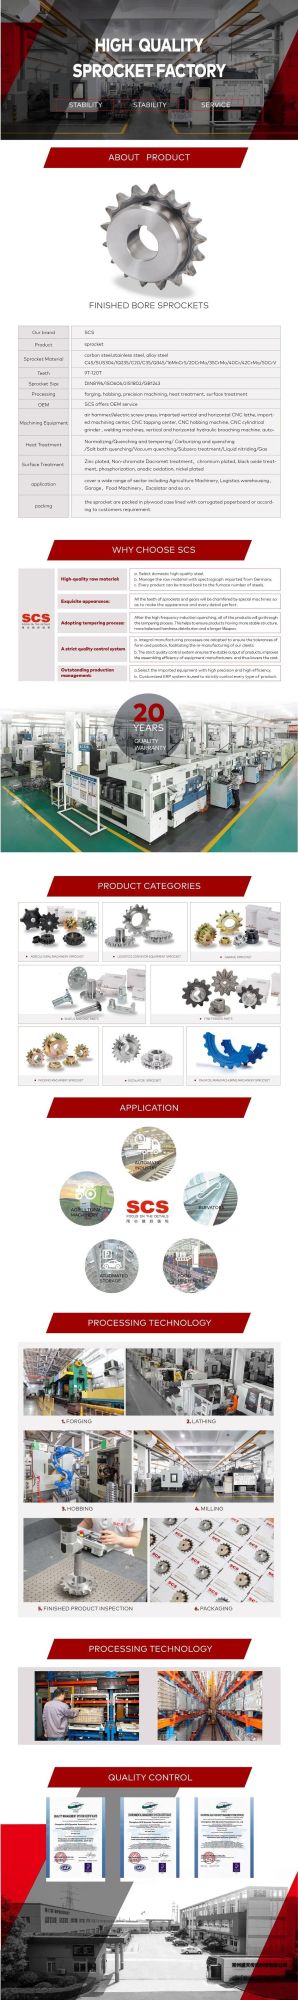 Premium Carbon Steel Roller Chain Drive Sprocket From China Sprocket Factory Scs